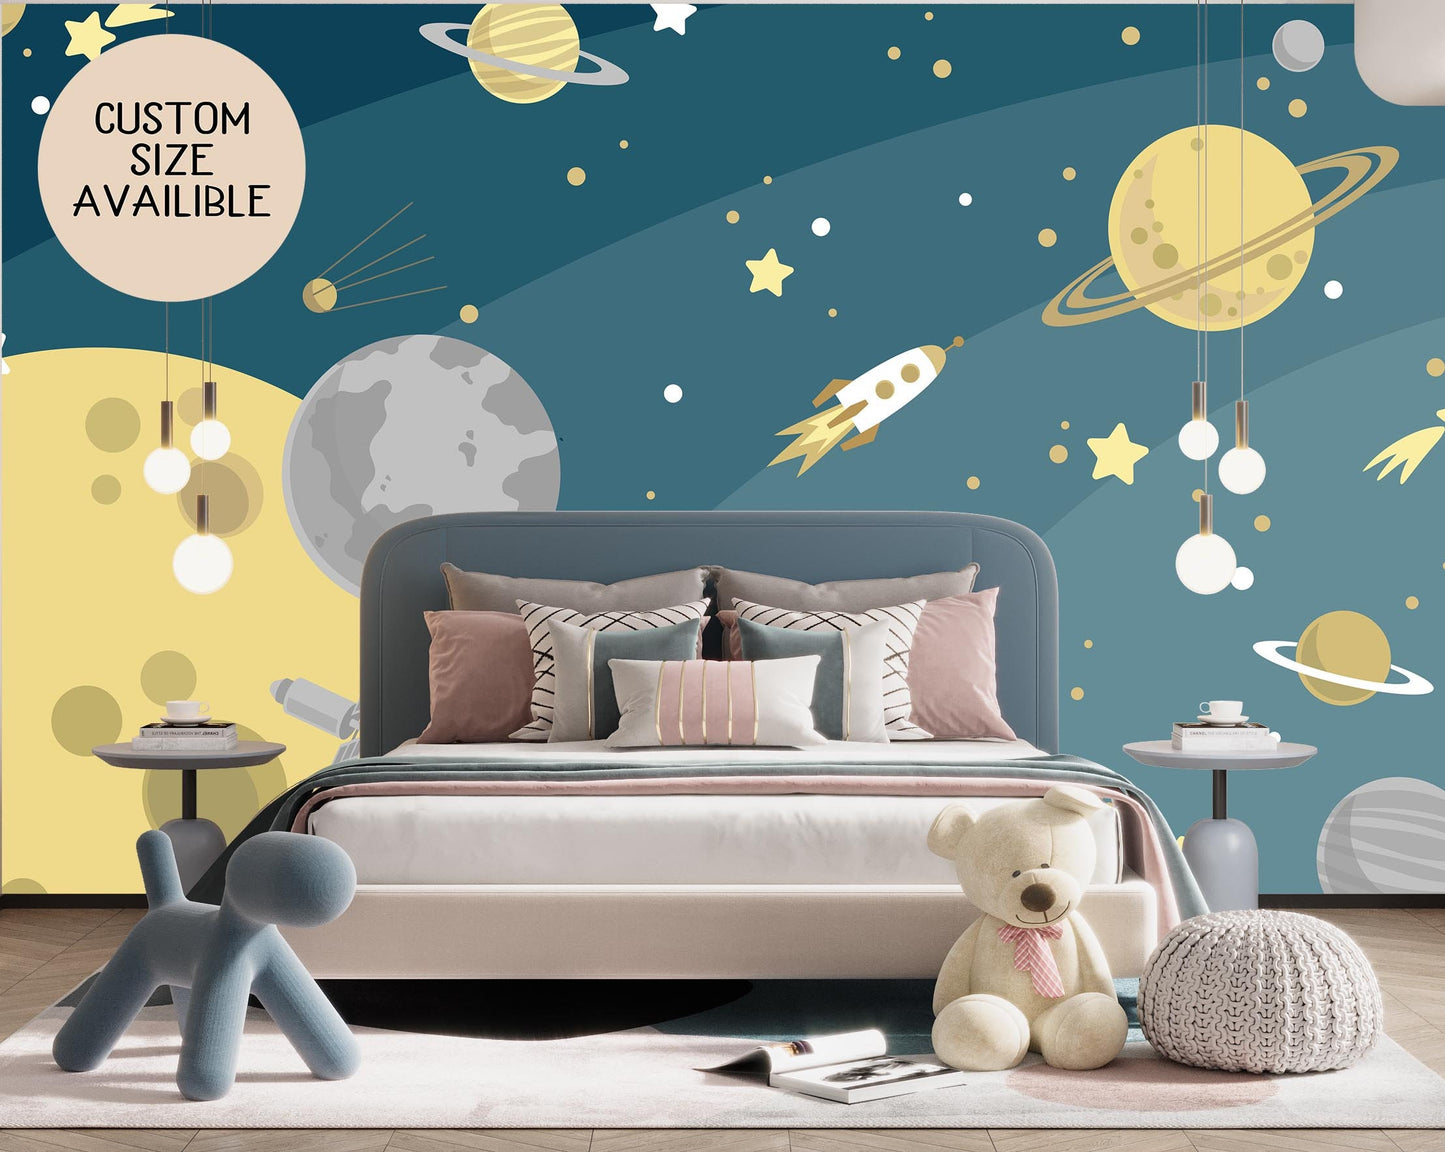 Removable Peel and Stick Wallpaper Cosmos Planet Wall Paper Wall Murals, KL0059